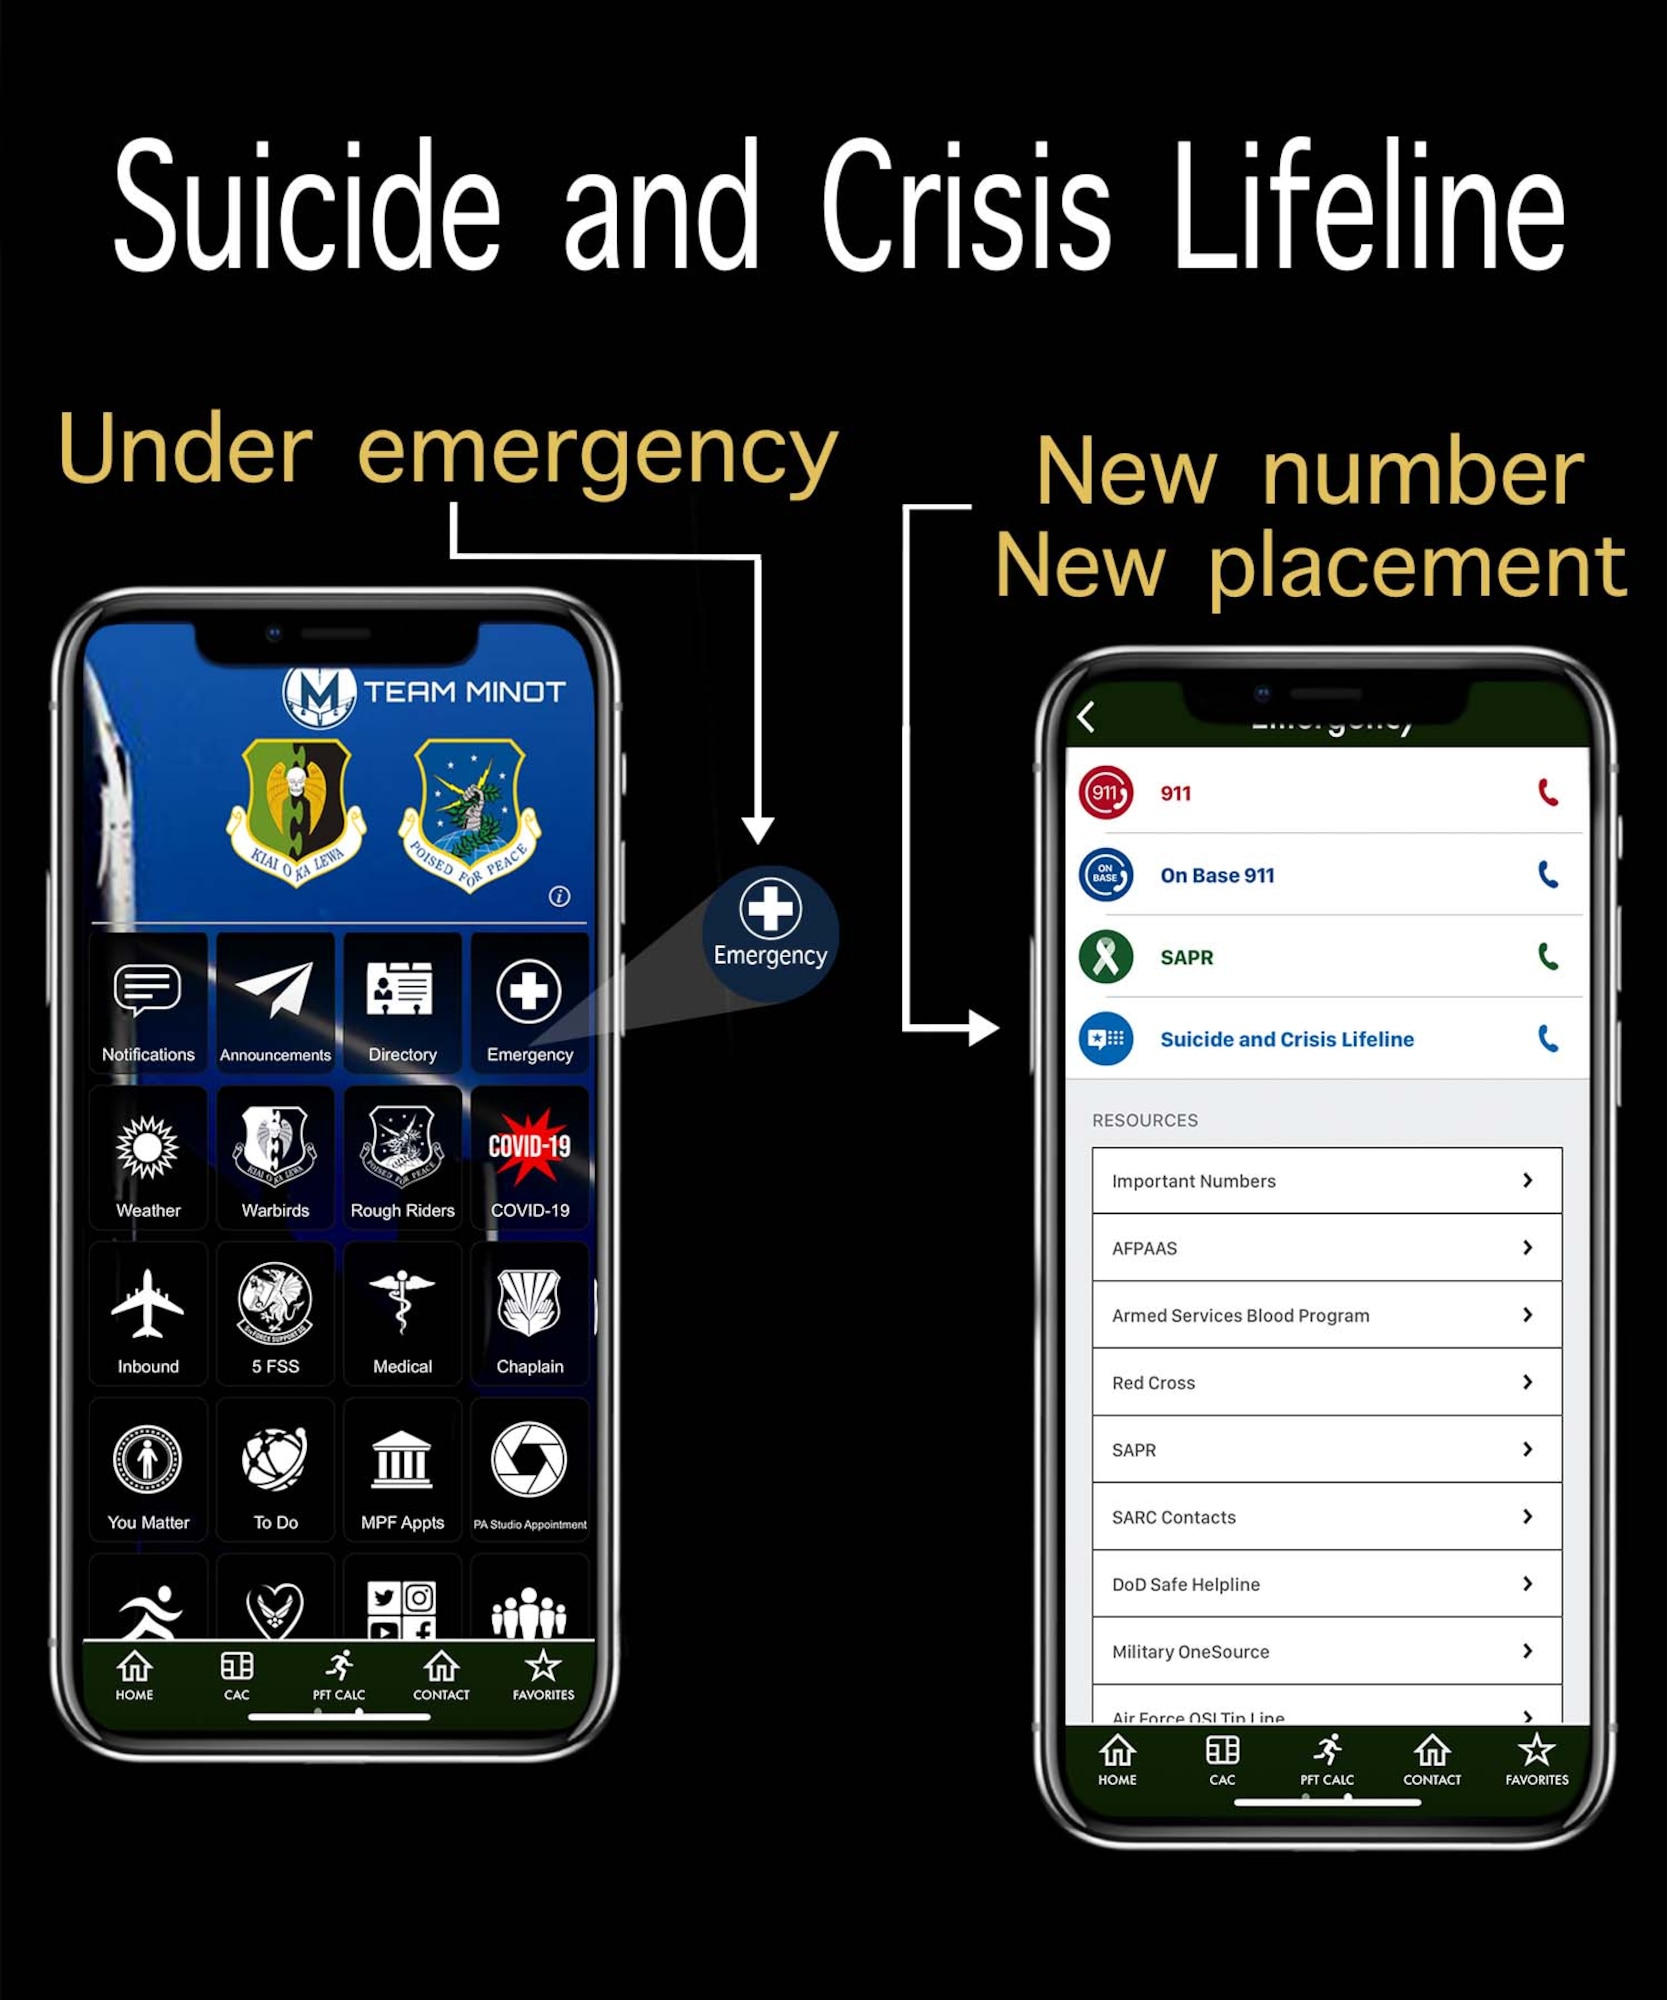 Suicide and Crisis Lifeline | New number and new placement If you're ever in need of someone to talk to, then reach out to the Suicide and Crisis Lifeline. The new emergency number serves as a universal entry point so that you can easily access 24/7 emotional support. To find the new Suicide and Crisis Lifeline phone number go to team Minot on the AF connect app, click the emergency tab and the phone number will be the last number on the top list of the main emergency numbers. 
For Veterans and service members, dial 988 and then press 1 to be connected to the Veterans Crisis Line. 
For active-duty personnel (VeteransCrisisLine.net/ActiveDuty.aspx), the Veterans Crisis Line is available:
-In Europe, call 00800 1273 8255 or DSN 118.
-In Korea, call 0808 555 118 or DSN 118.
-In Afghanistan, call 00 1 800 273 8255 or DSN 111.
To learn more visit
988lifeline.org